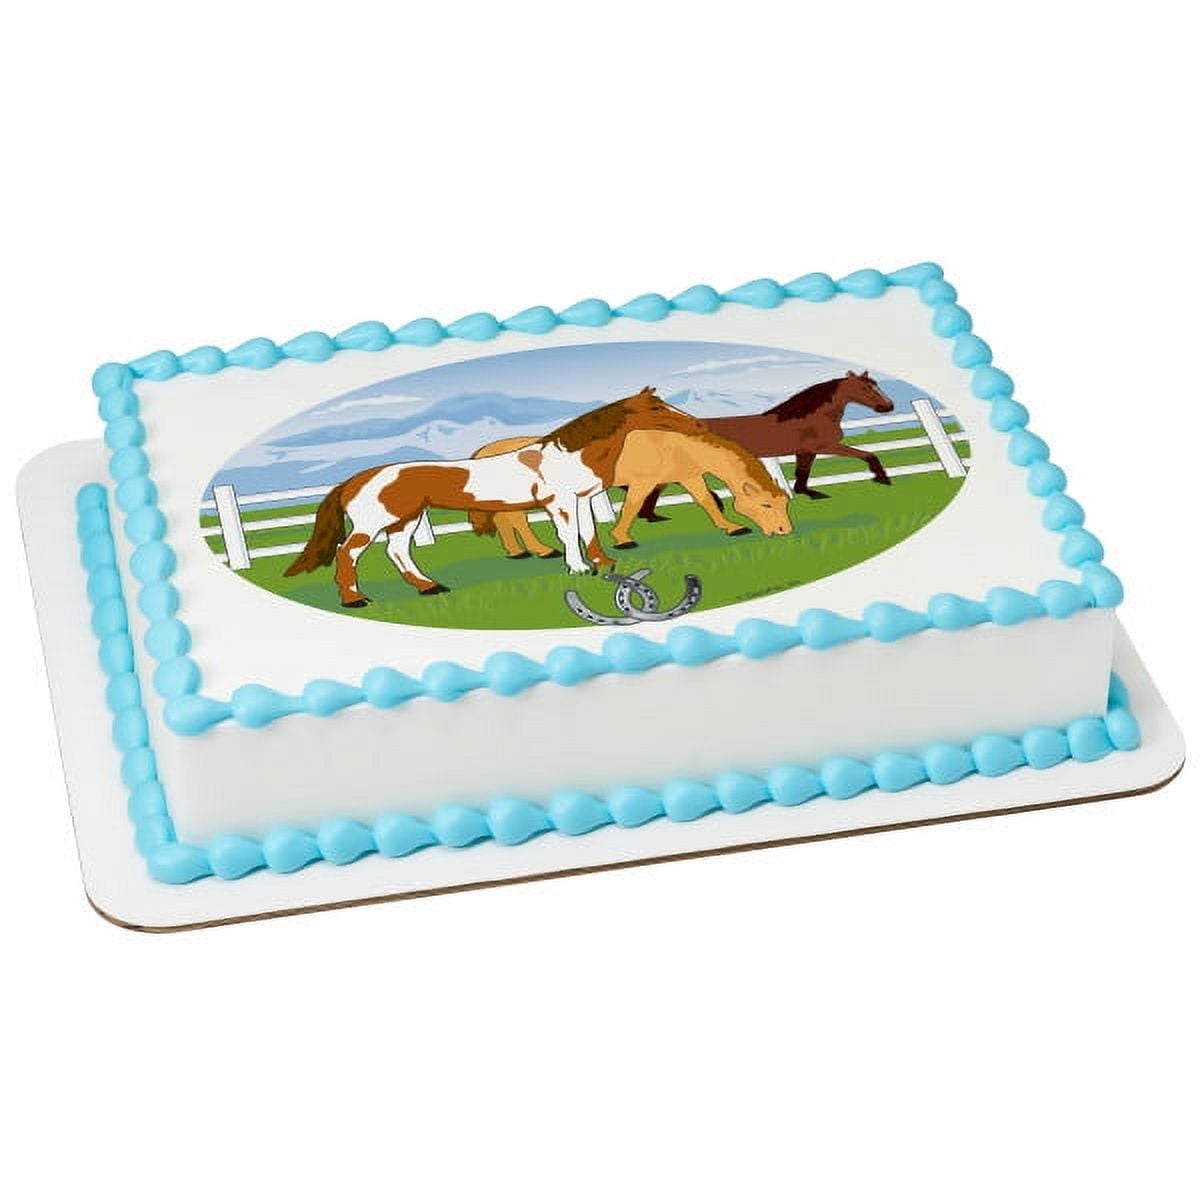 Child's Horse Birthday Cake | The Twisted Sifter